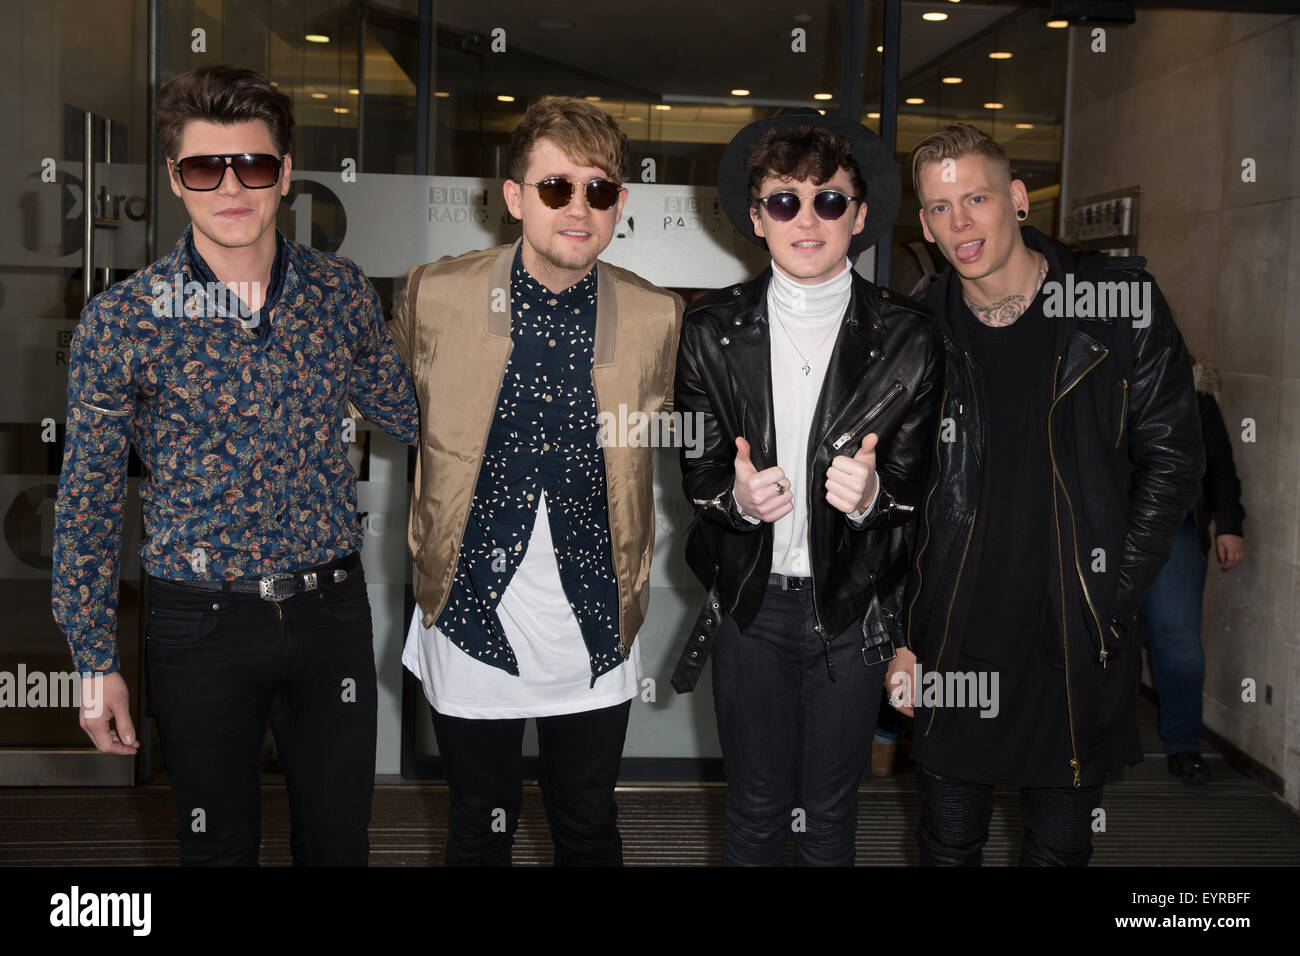 Rixton, Jake Roche, Charley Bagnall, Lewi Morgan, Danny Wilkin pictured arriving the Radio 1 studio to perform on the Live Lounge  Featuring: Rixton, Jake Roche, Charley Bagnall, Lewi Morgan, Danny Wilkin Where: London, United Kingdom When: 02 Jun 2015 C Stock Photo